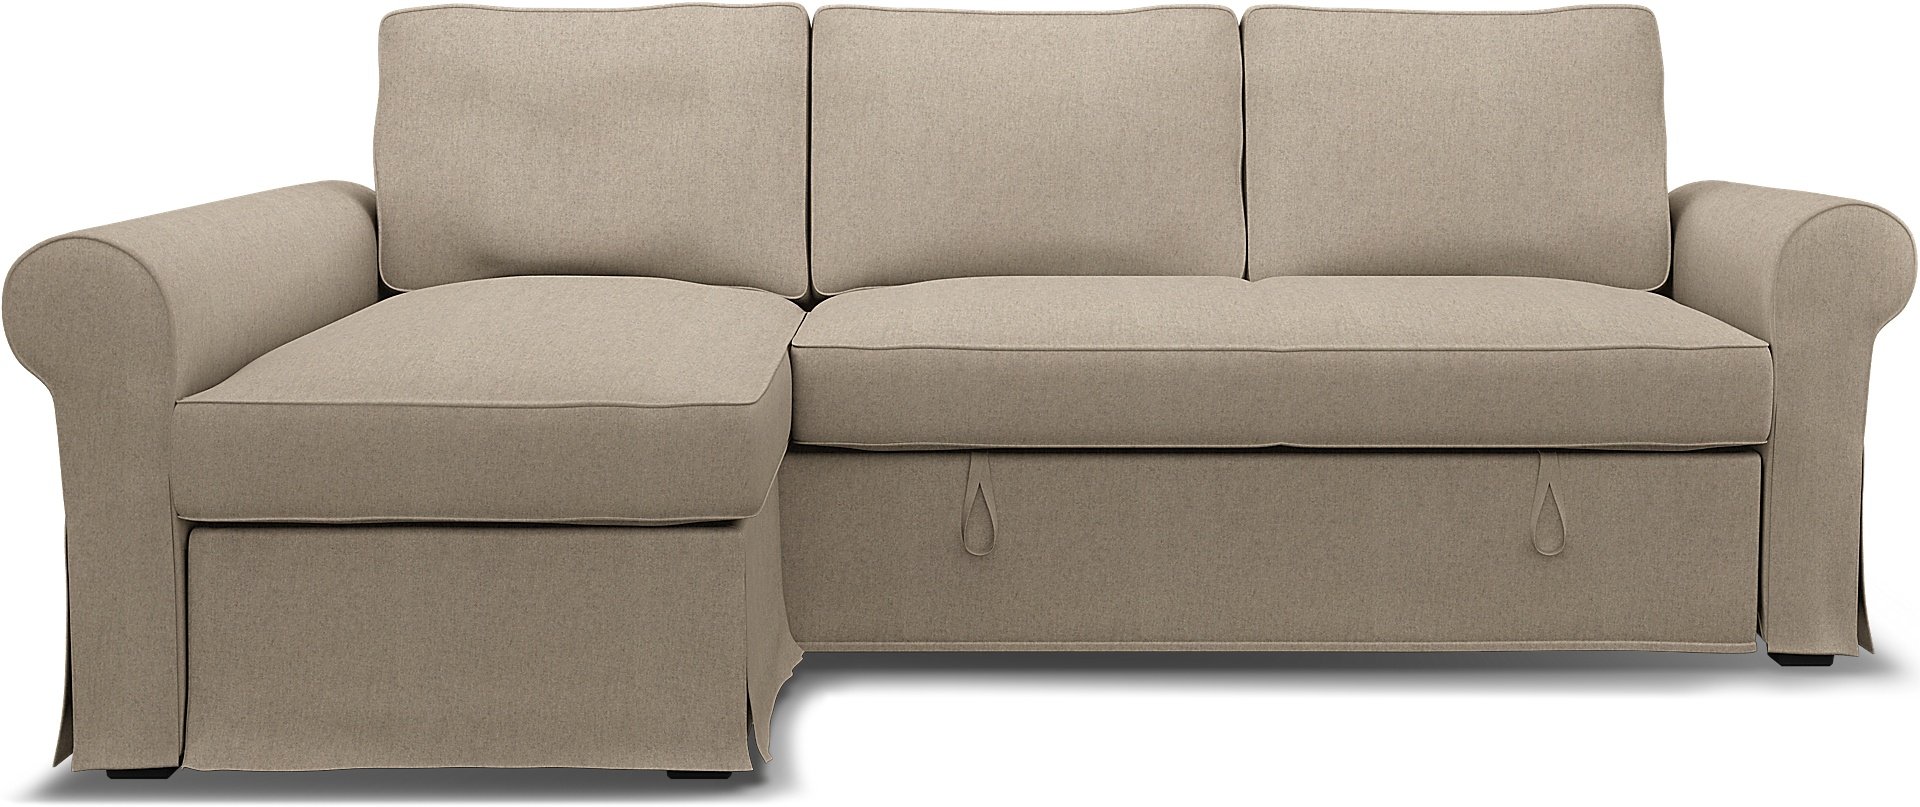 IKEA - Backabro Sofabed with Chaise Cover, Birch, Wool - Bemz